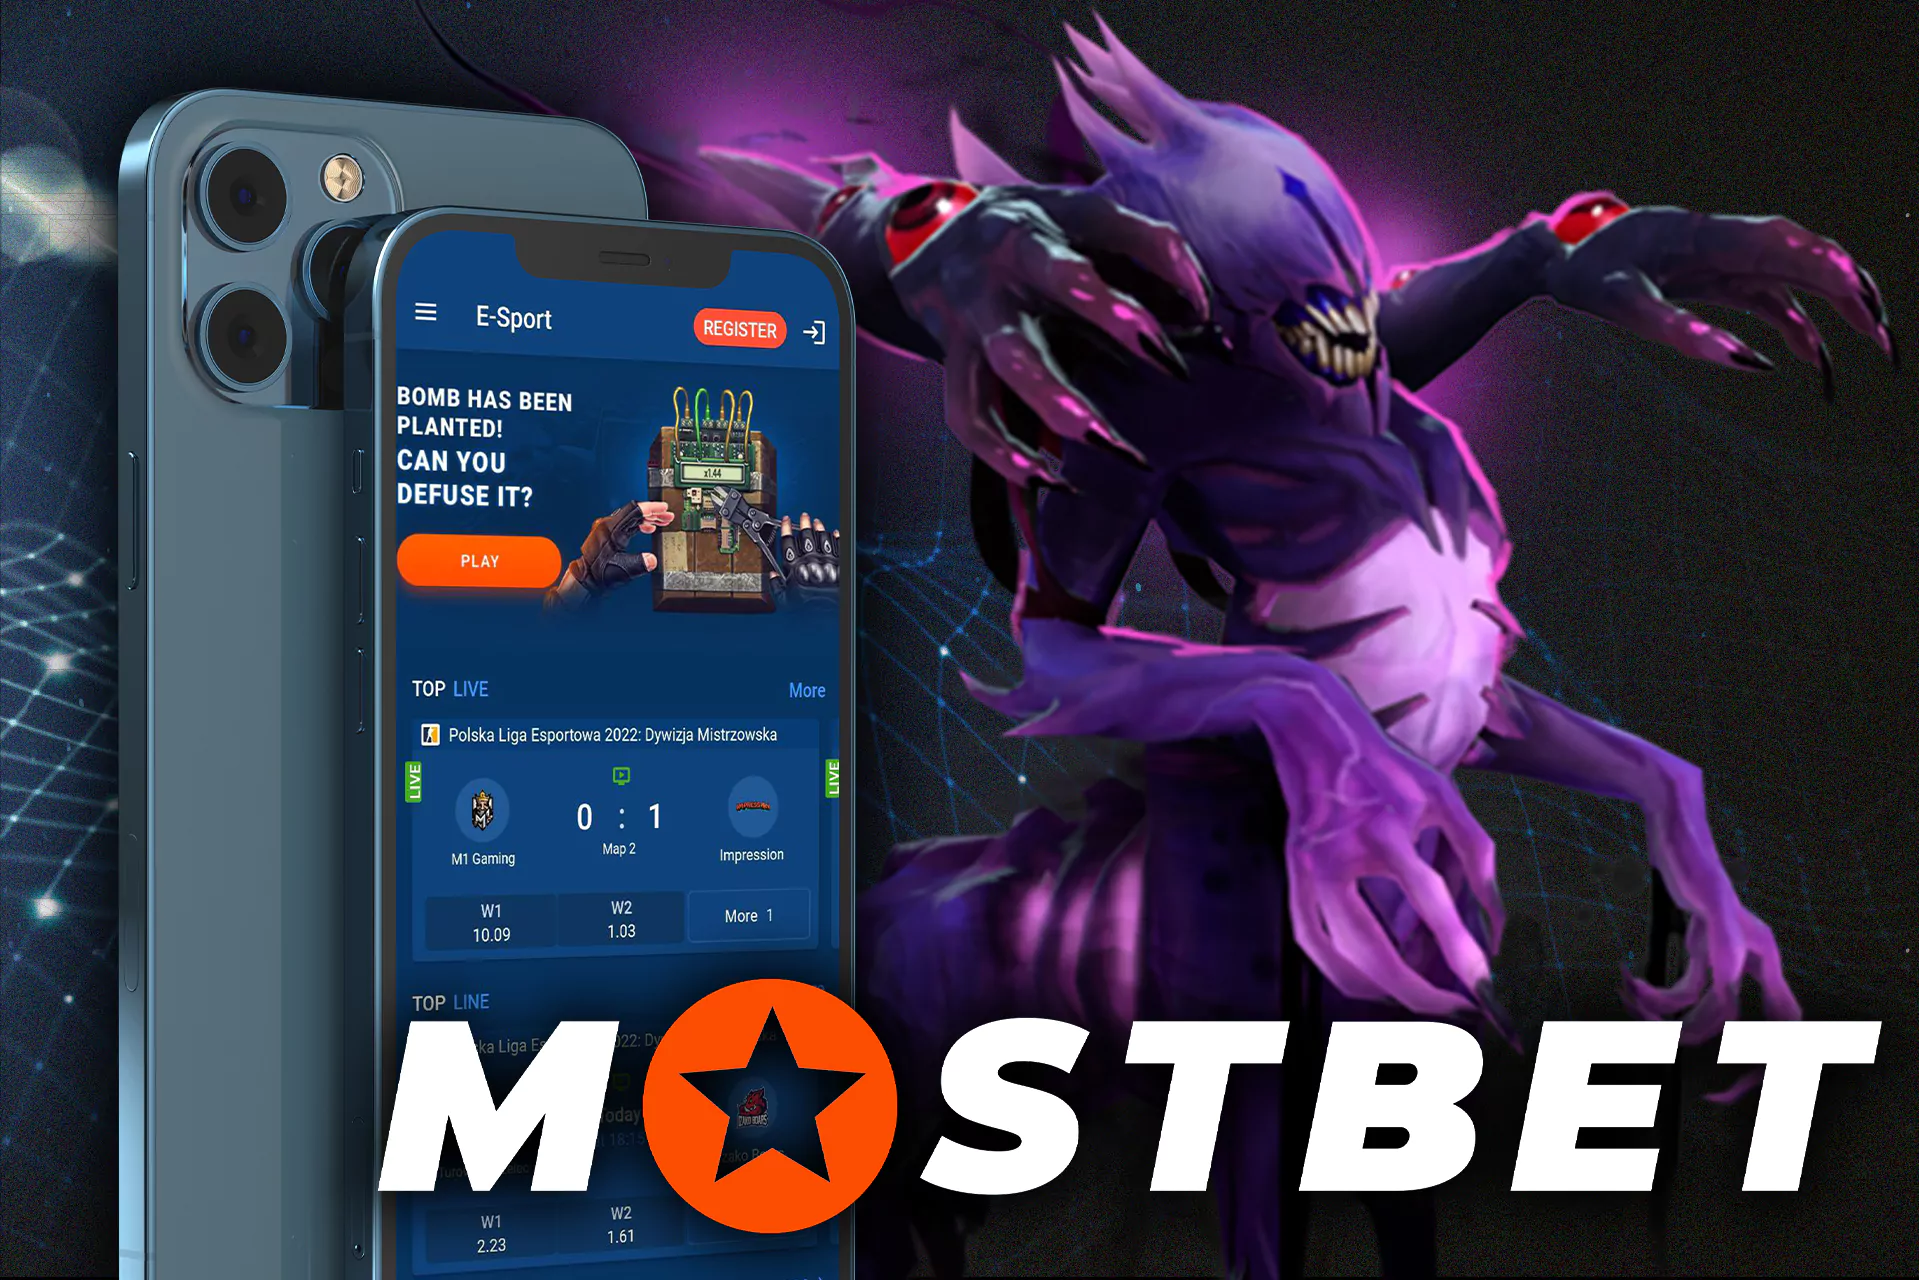 The section with esports betting in the app.